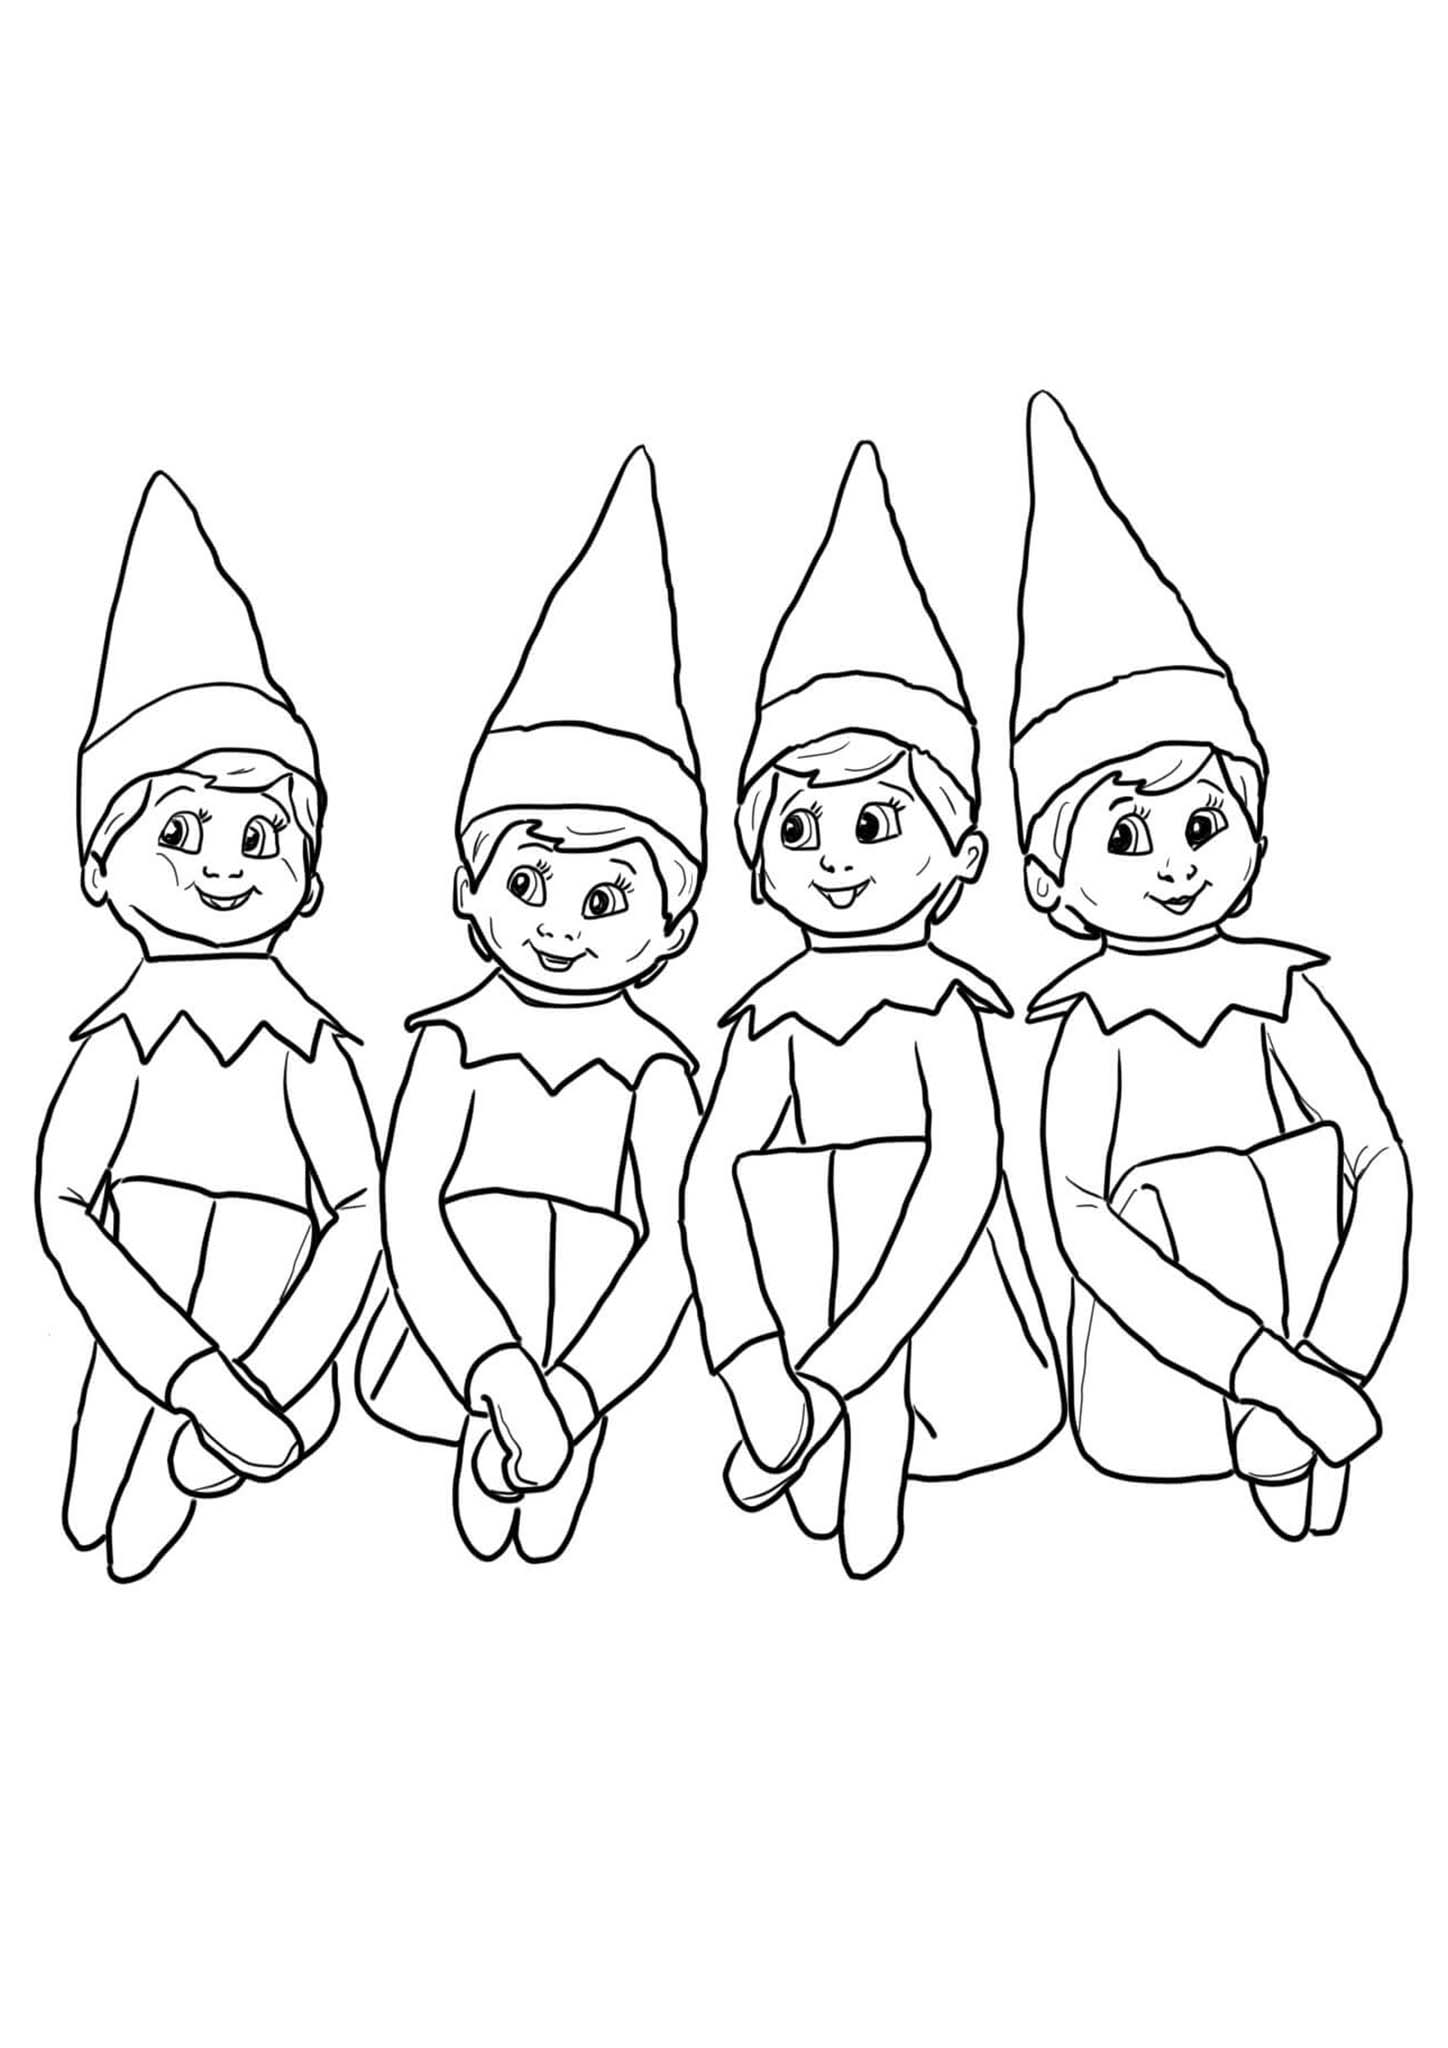 Free printable elf on the shelf coloring pages